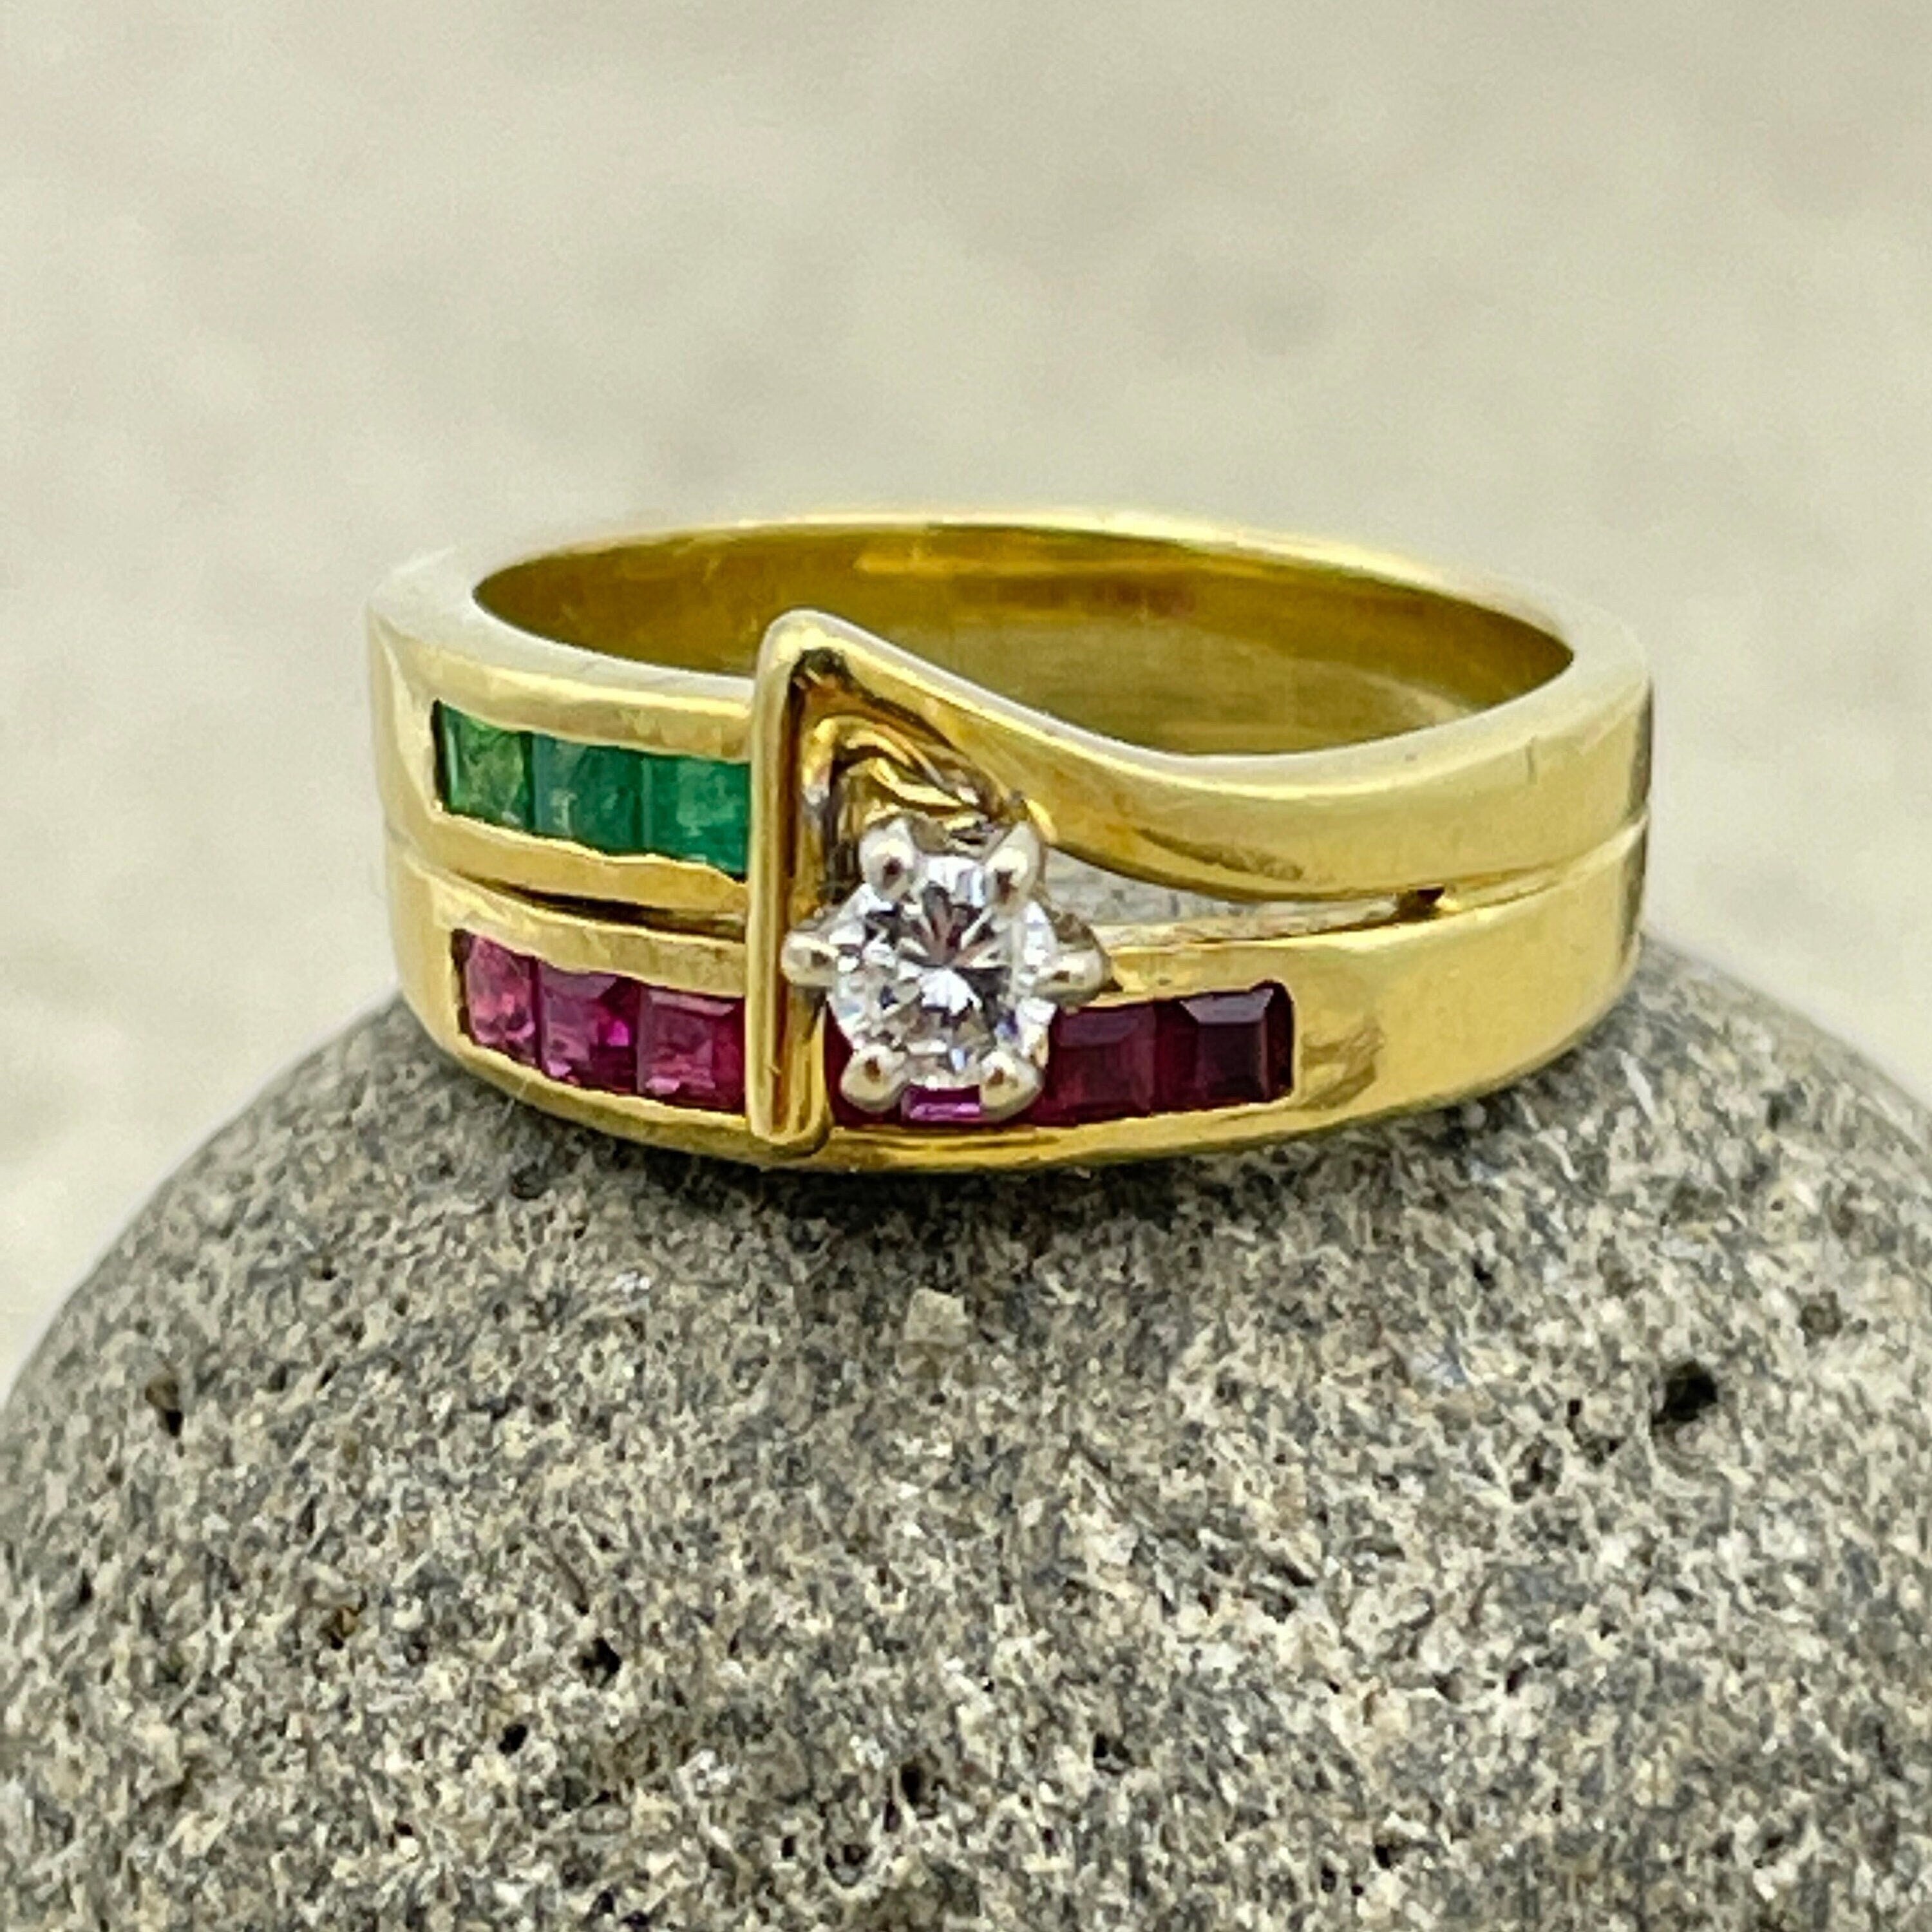 Vintage diamond, emerald and ruby 18ct gold ring, modernist style c1950s/60s